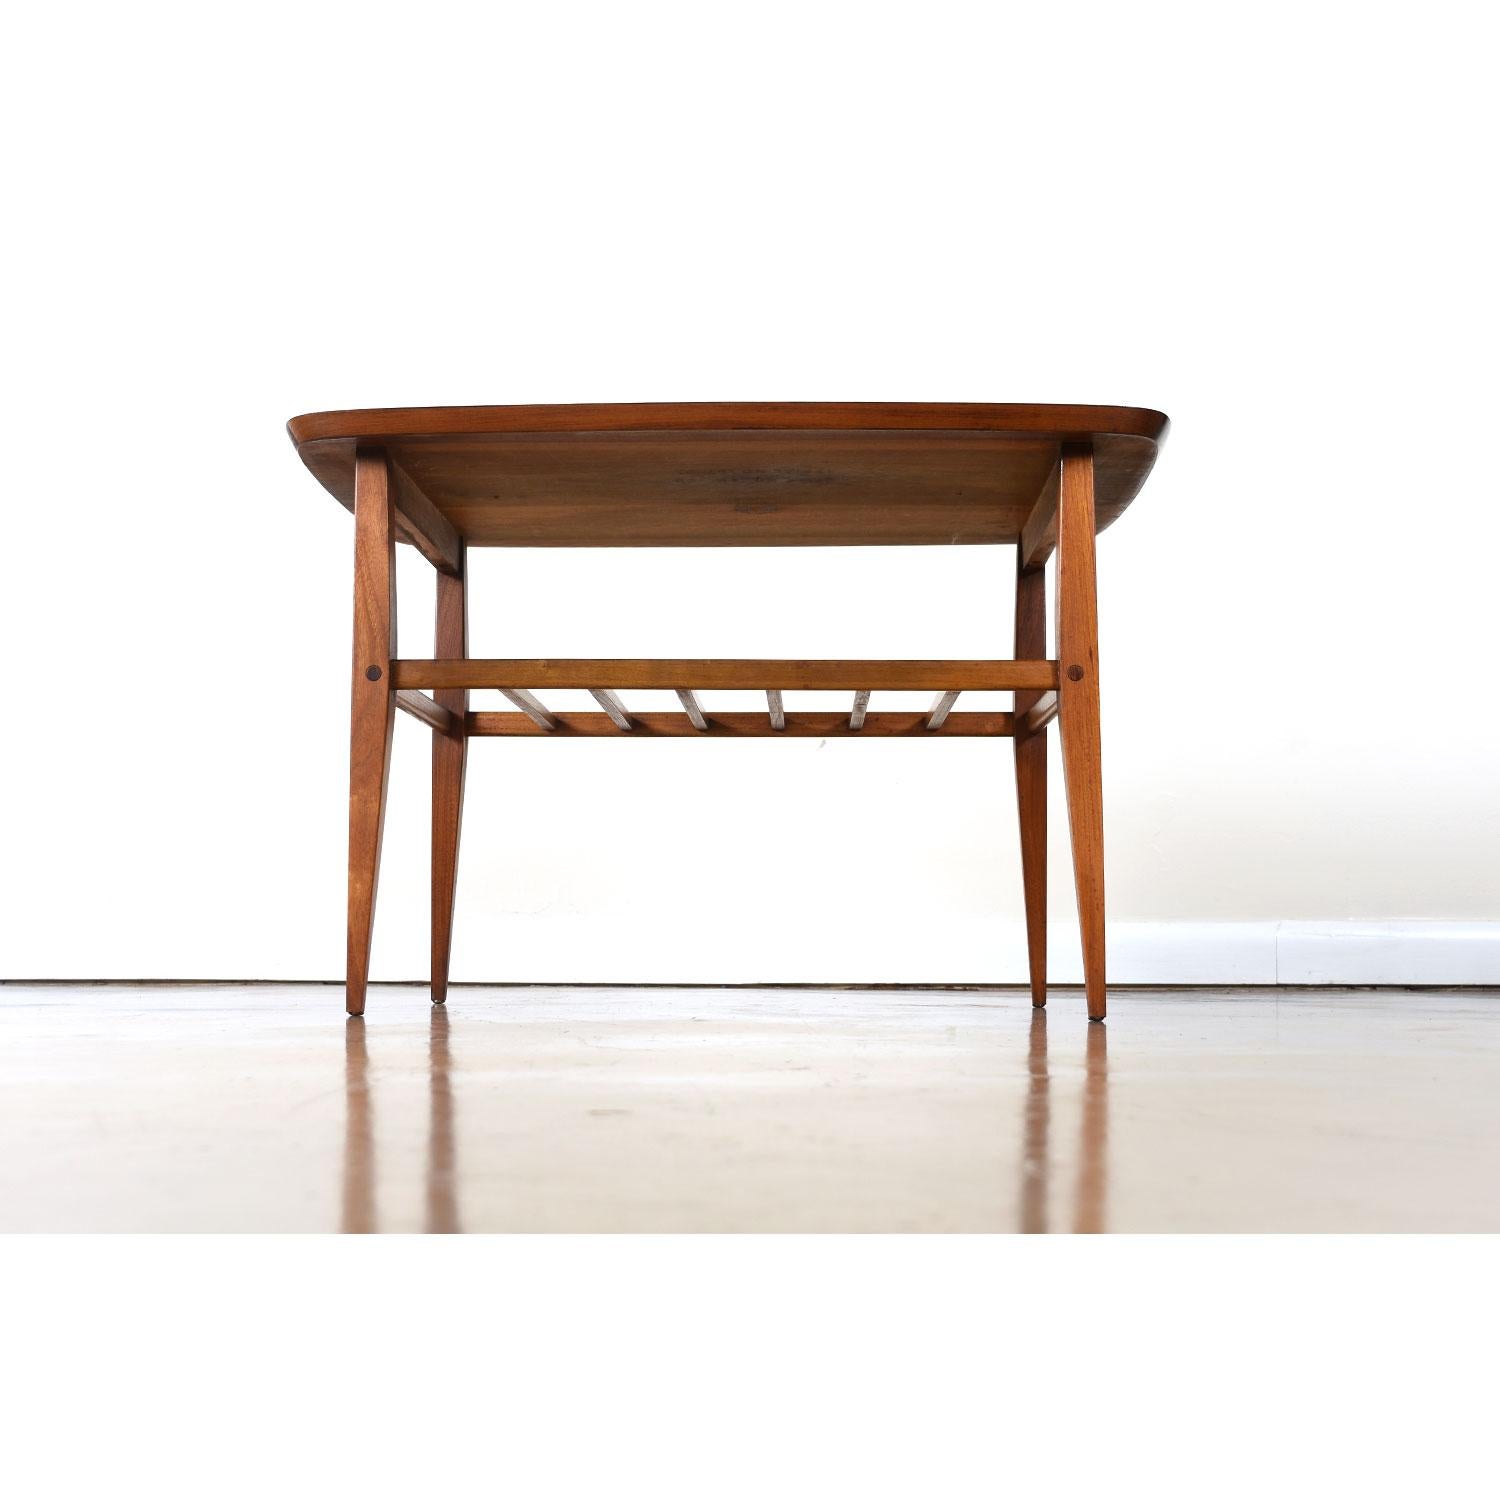 American Restored Mid-Century Modern Lane Accent Tiered Walnut End Tables